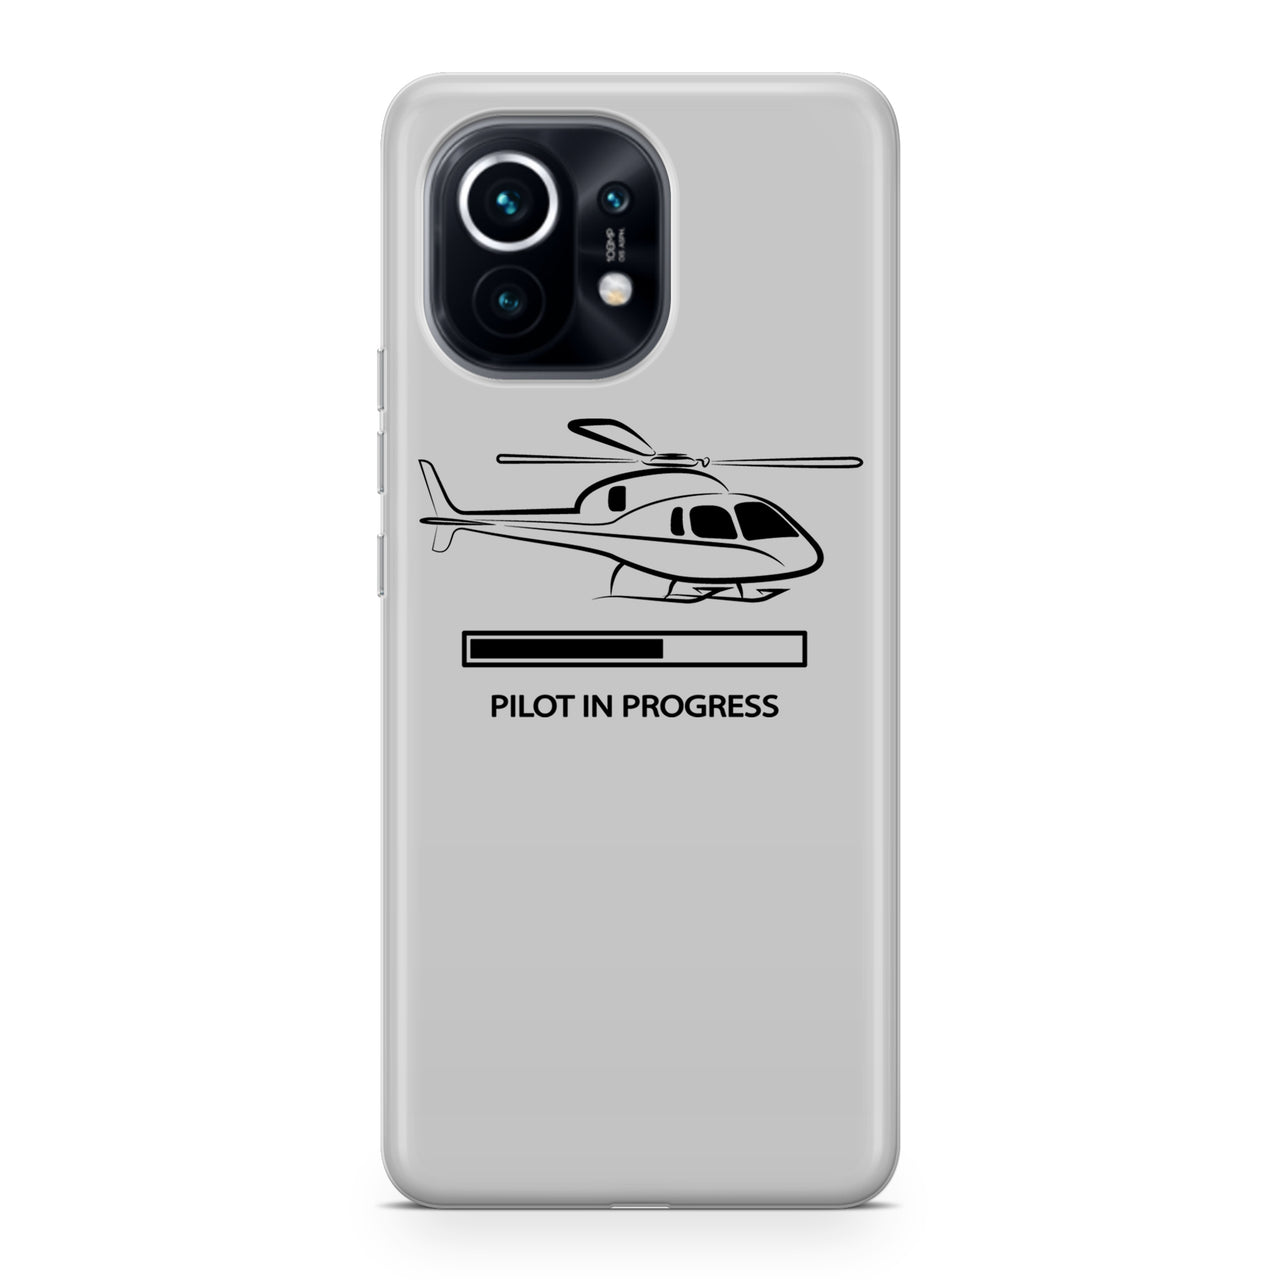 Pilot In Progress (Helicopter) Designed Xiaomi Cases